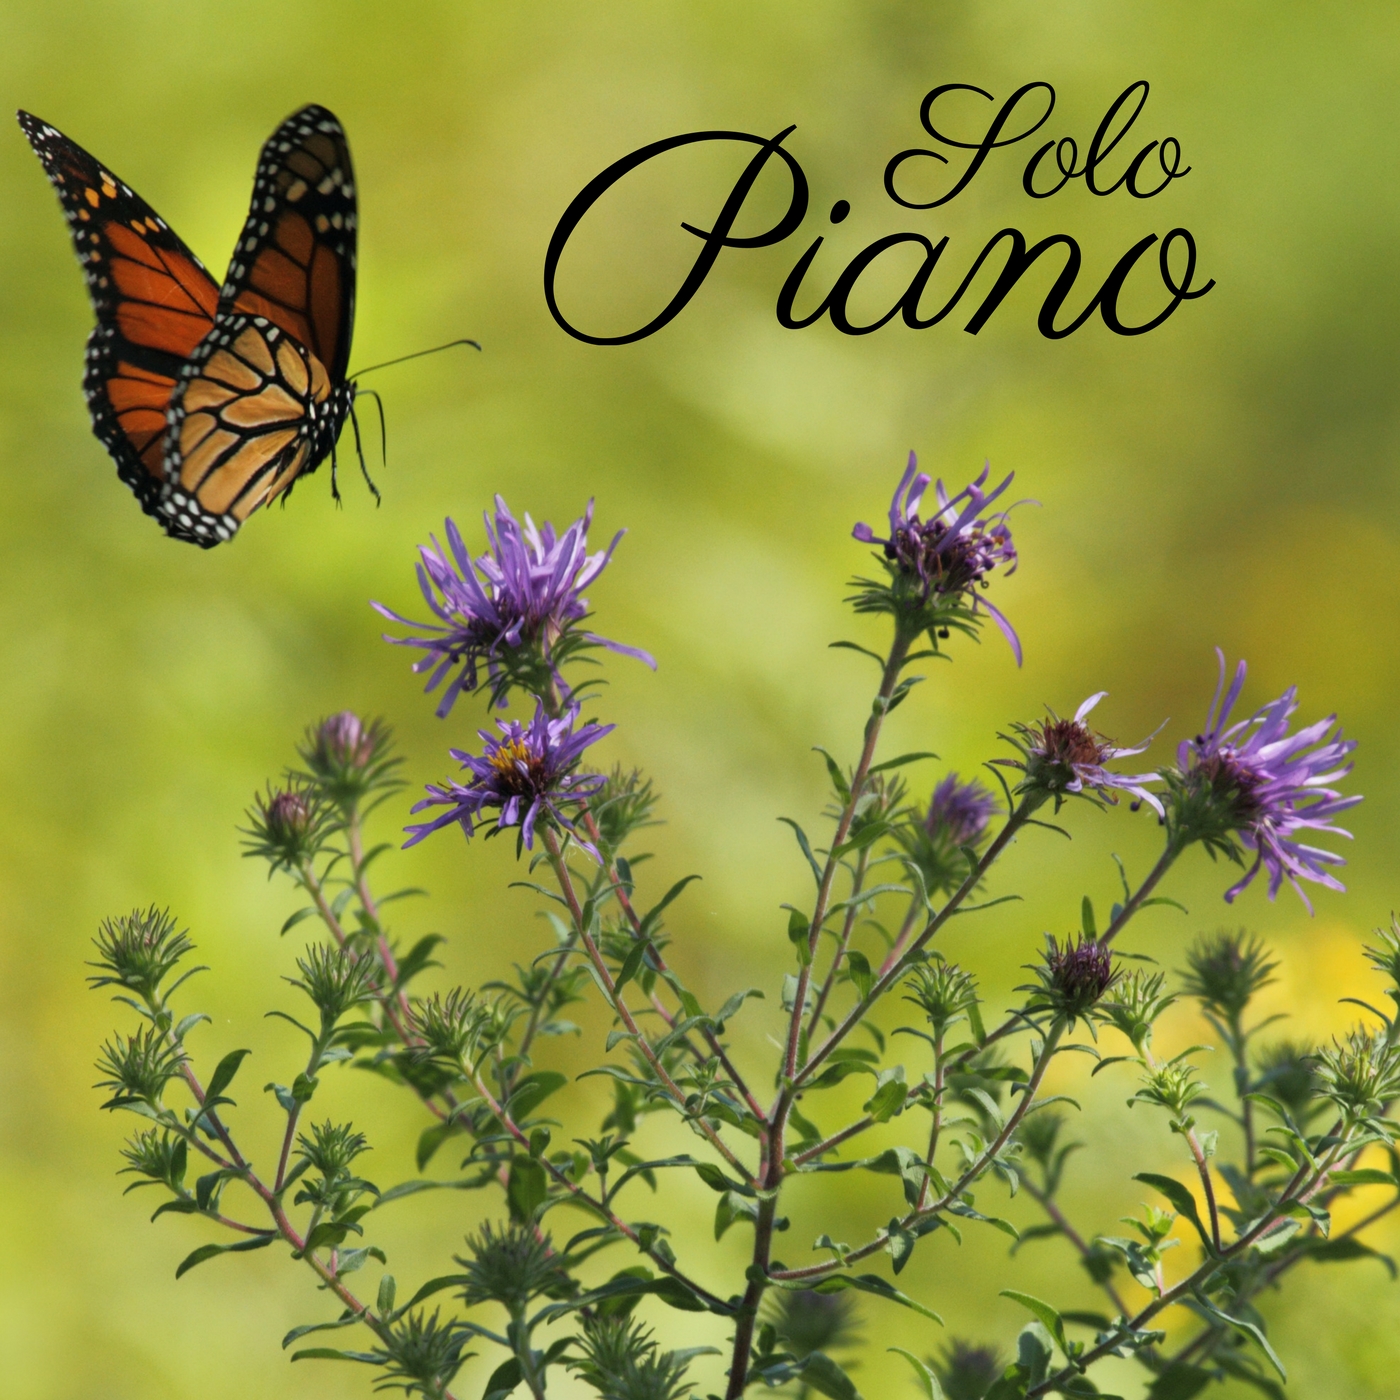 Piano Solo – Classical Music for Relaxation